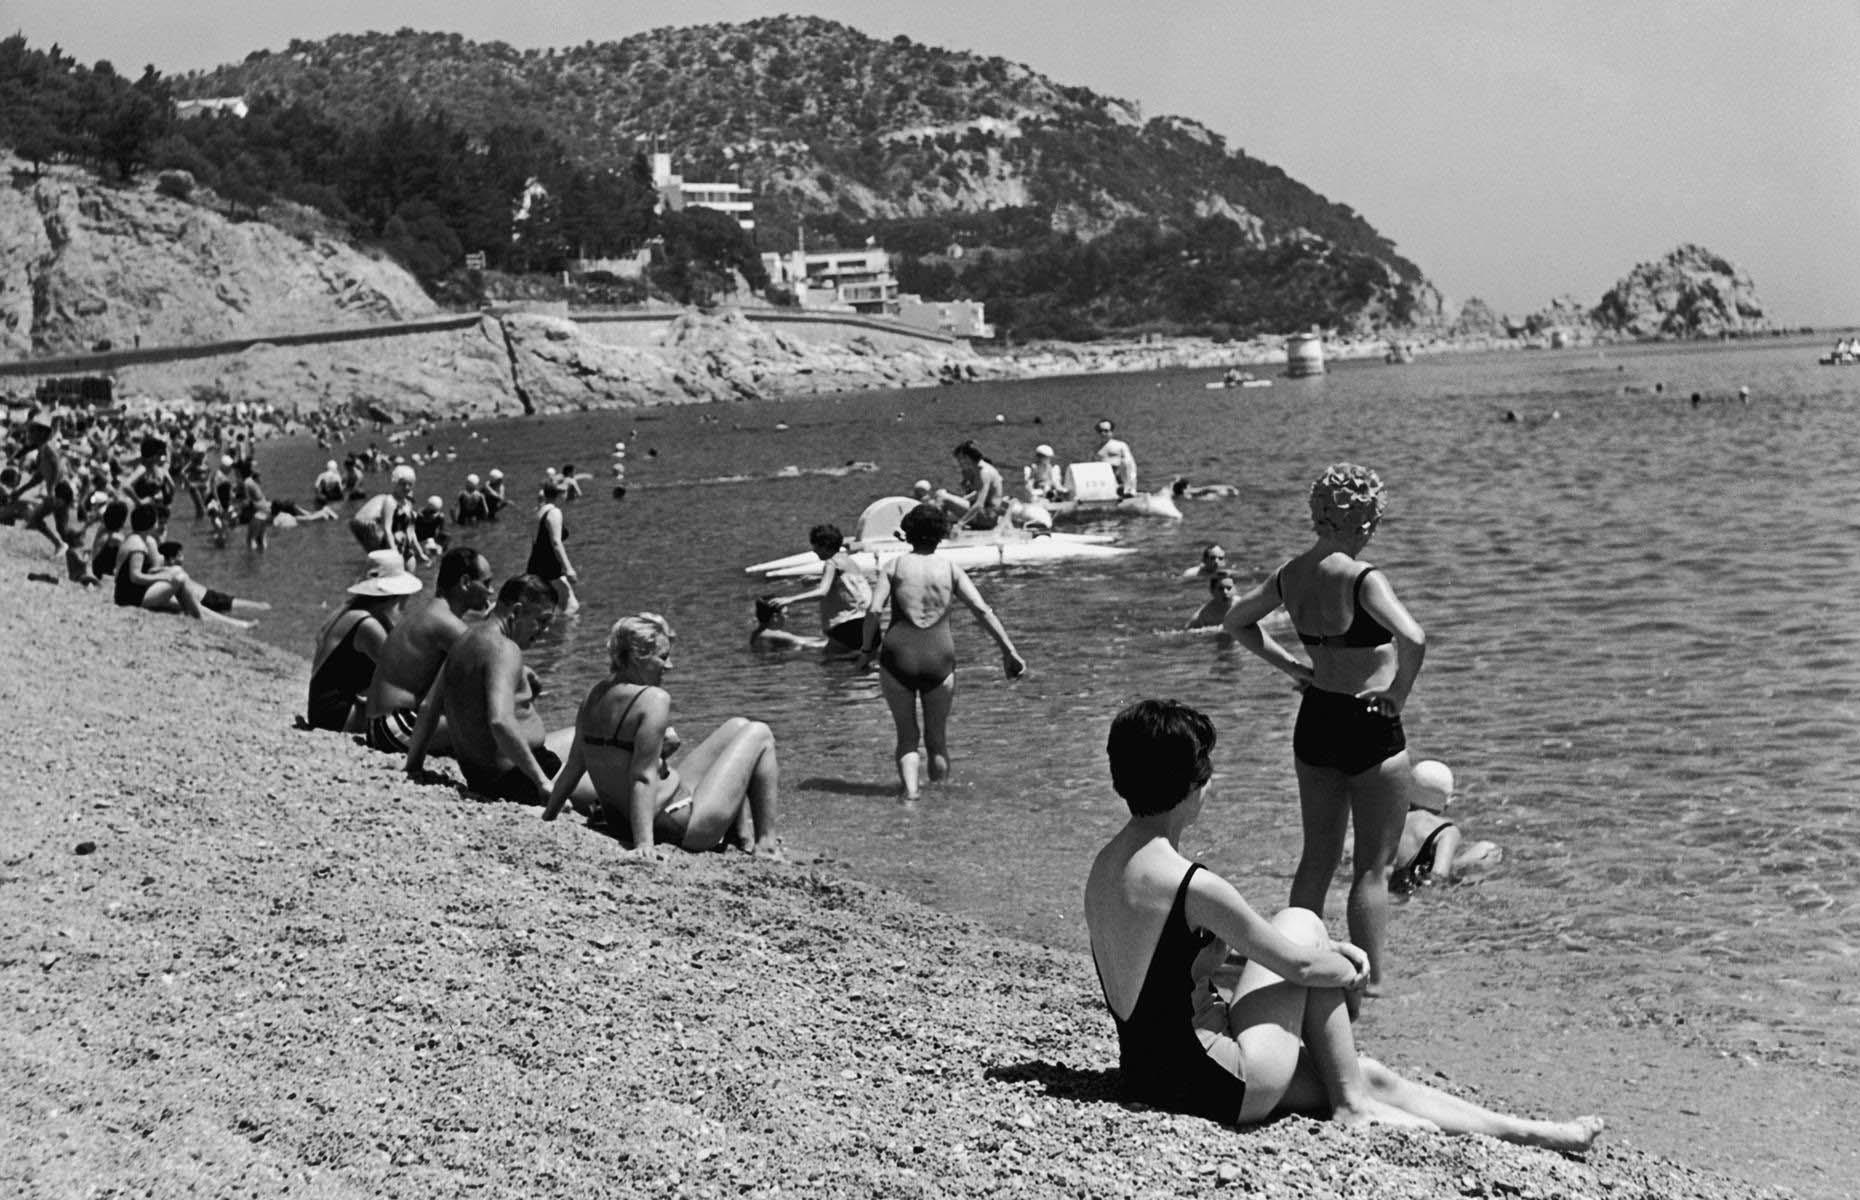 Back in Europe in the 1950s, Spanish tourist resorts such as Costa Brava and Costa Blanca were becoming increasingly popular with wealthy Brits, who mainly traveled on package vacations. While these Mediterranean spots typically attracted tourists from the UK, some well-off Americans keen to pair a fly-and-flop break with a tour of Europe could be found on these beaches too. Pictured here is Tossa de Mar, a resort especially popular with British sunseekers, in 1965.